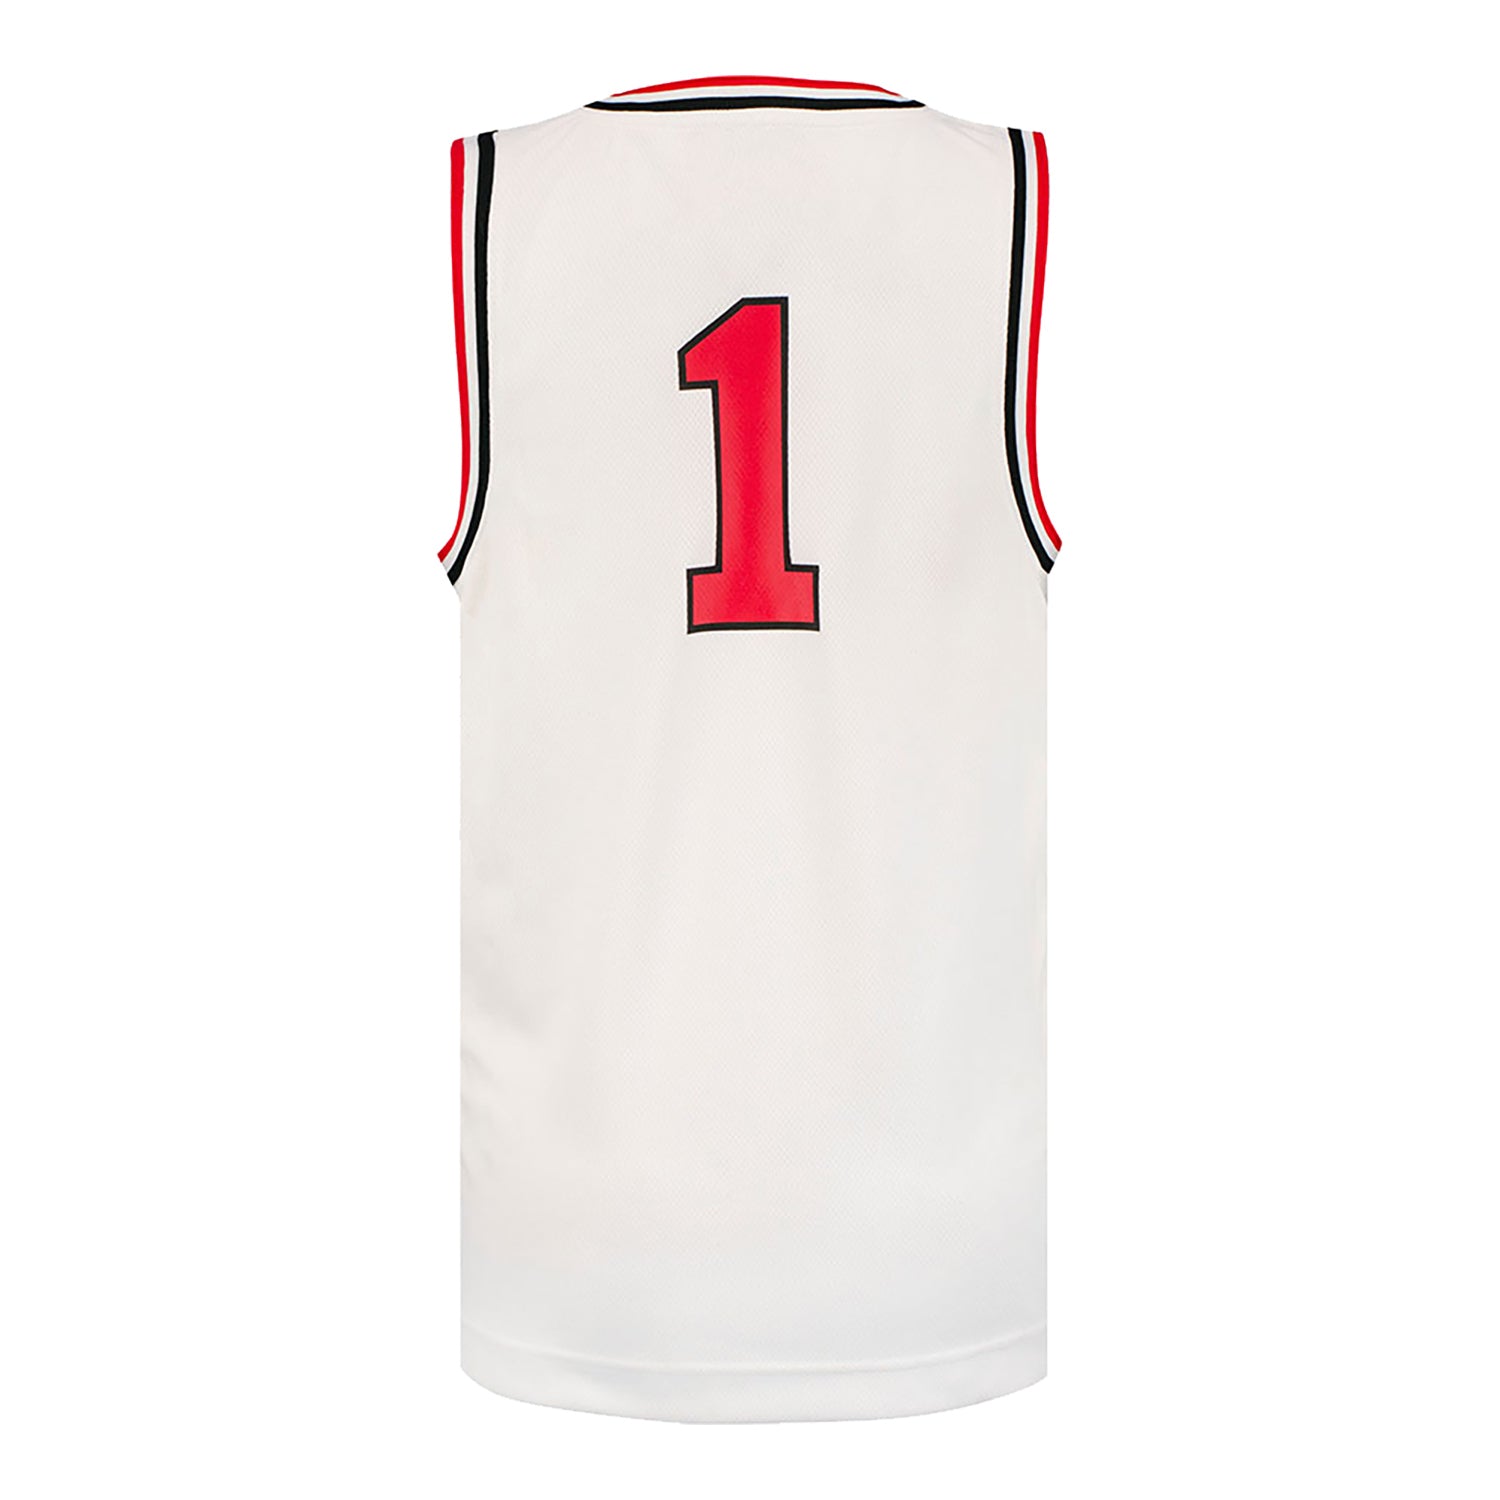 Chicago Bulls on X: A LOT of you wanted a custom jersey phone